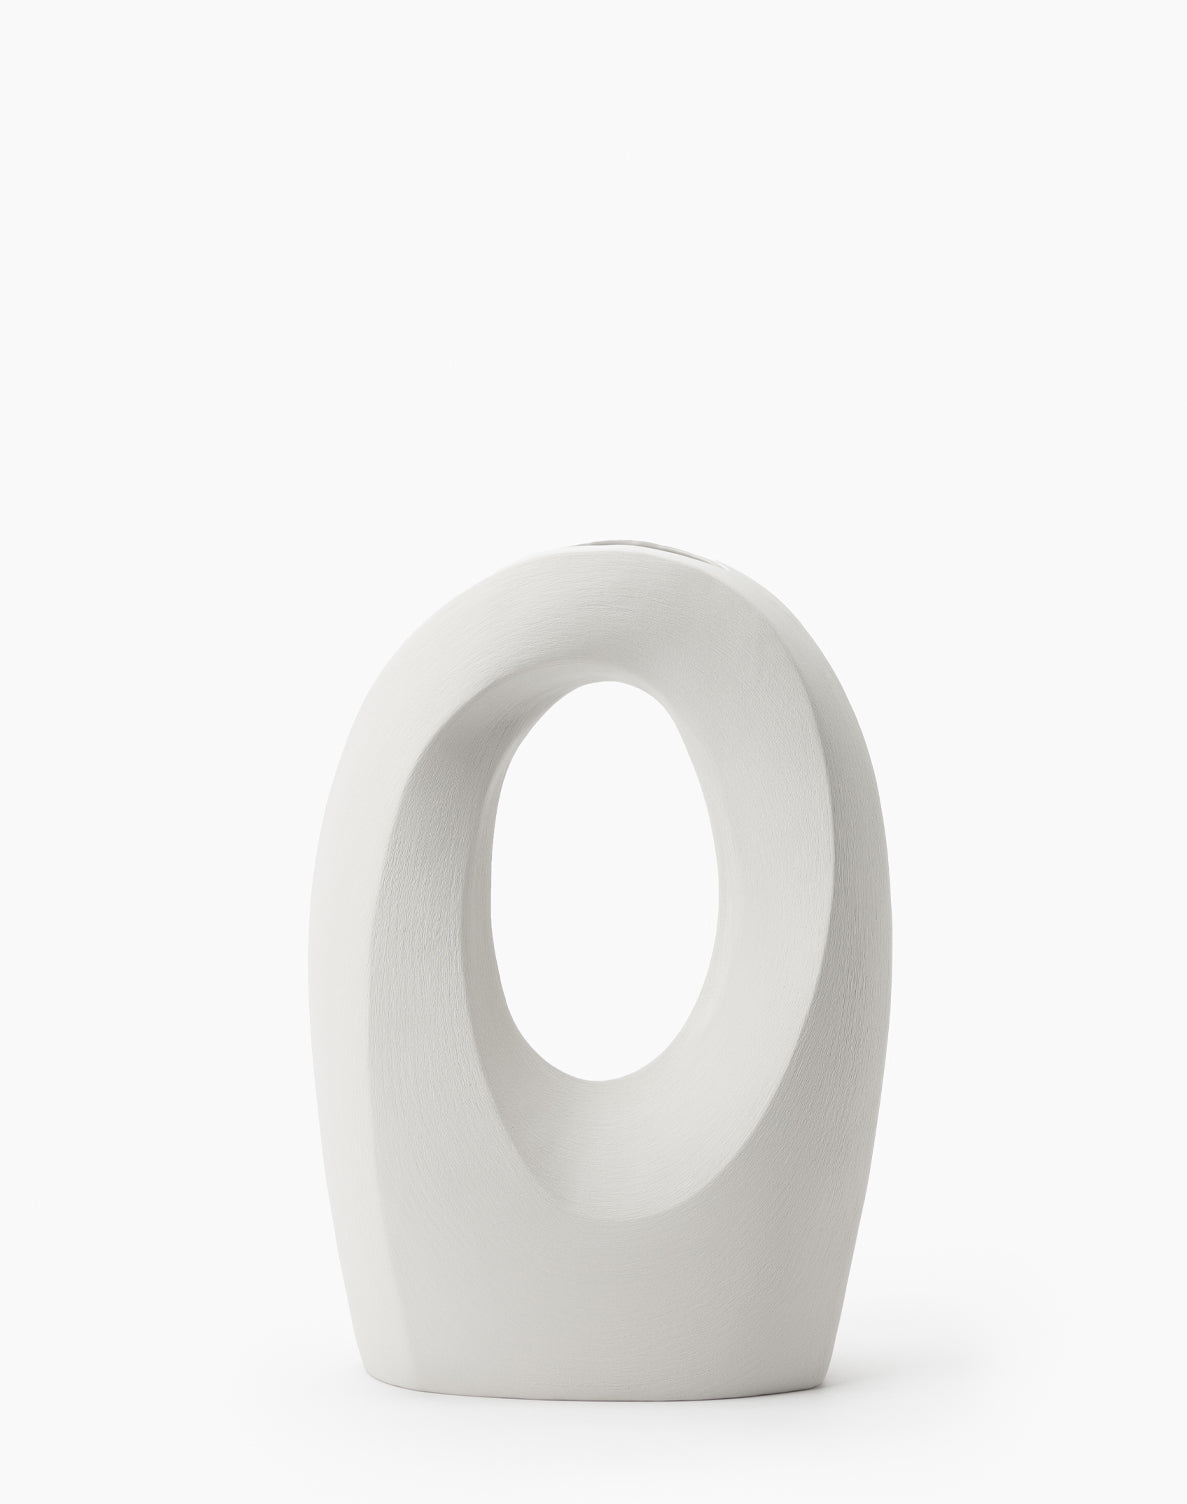 Zodax, Ivory Abstract Oval Vase